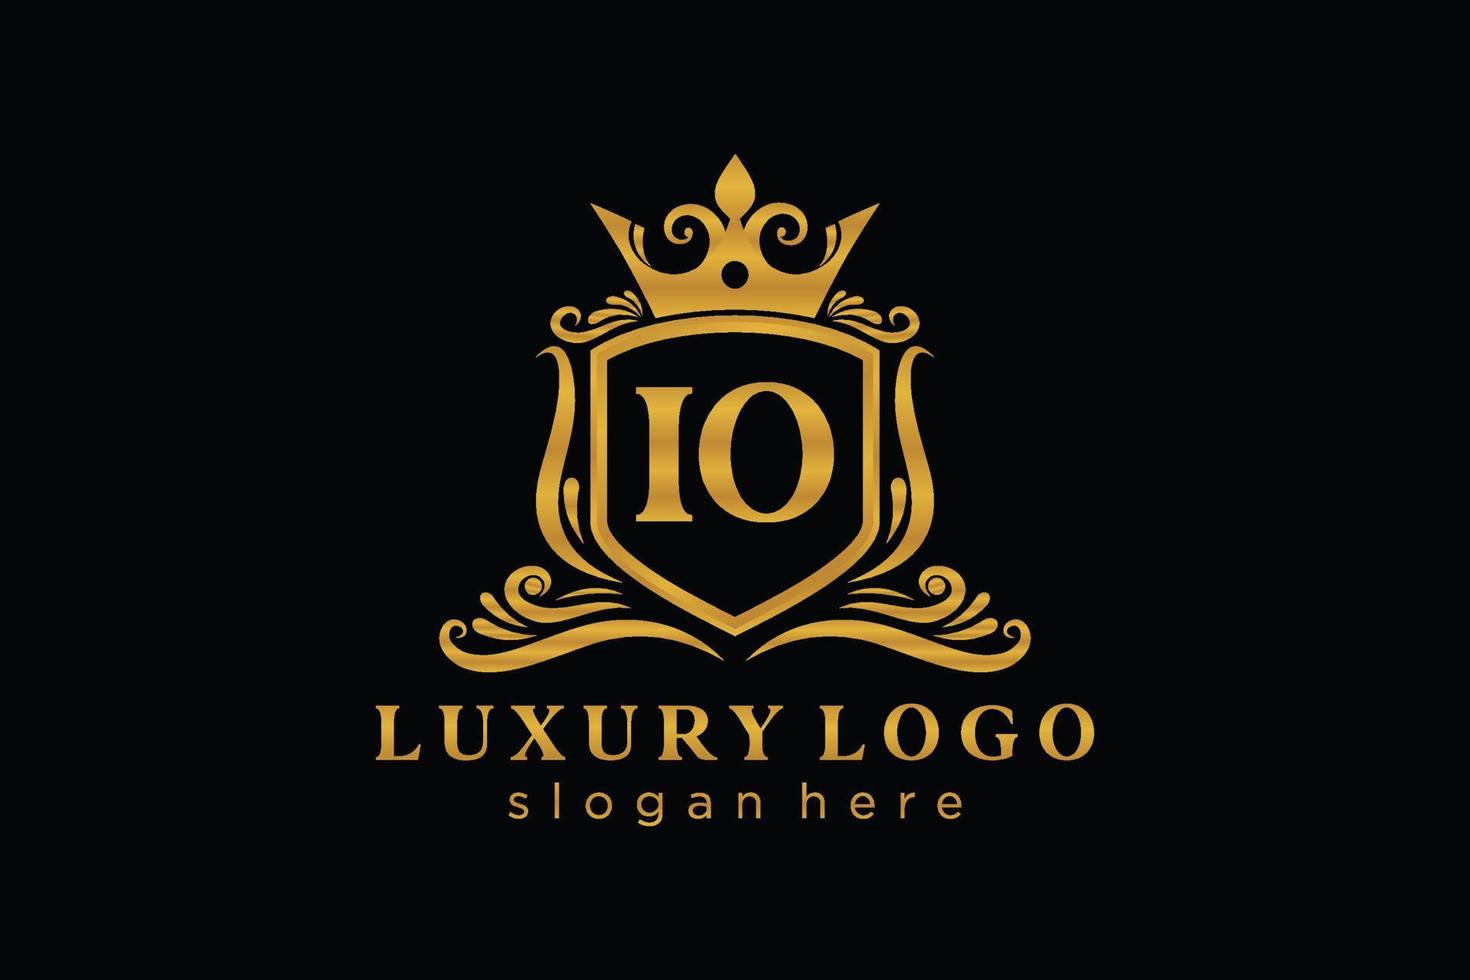 Initial IO Letter Royal Luxury Logo template in vector art for Restaurant, Royalty, Boutique, Cafe, Hotel, Heraldic, Jewelry, Fashion and other vector illustration.